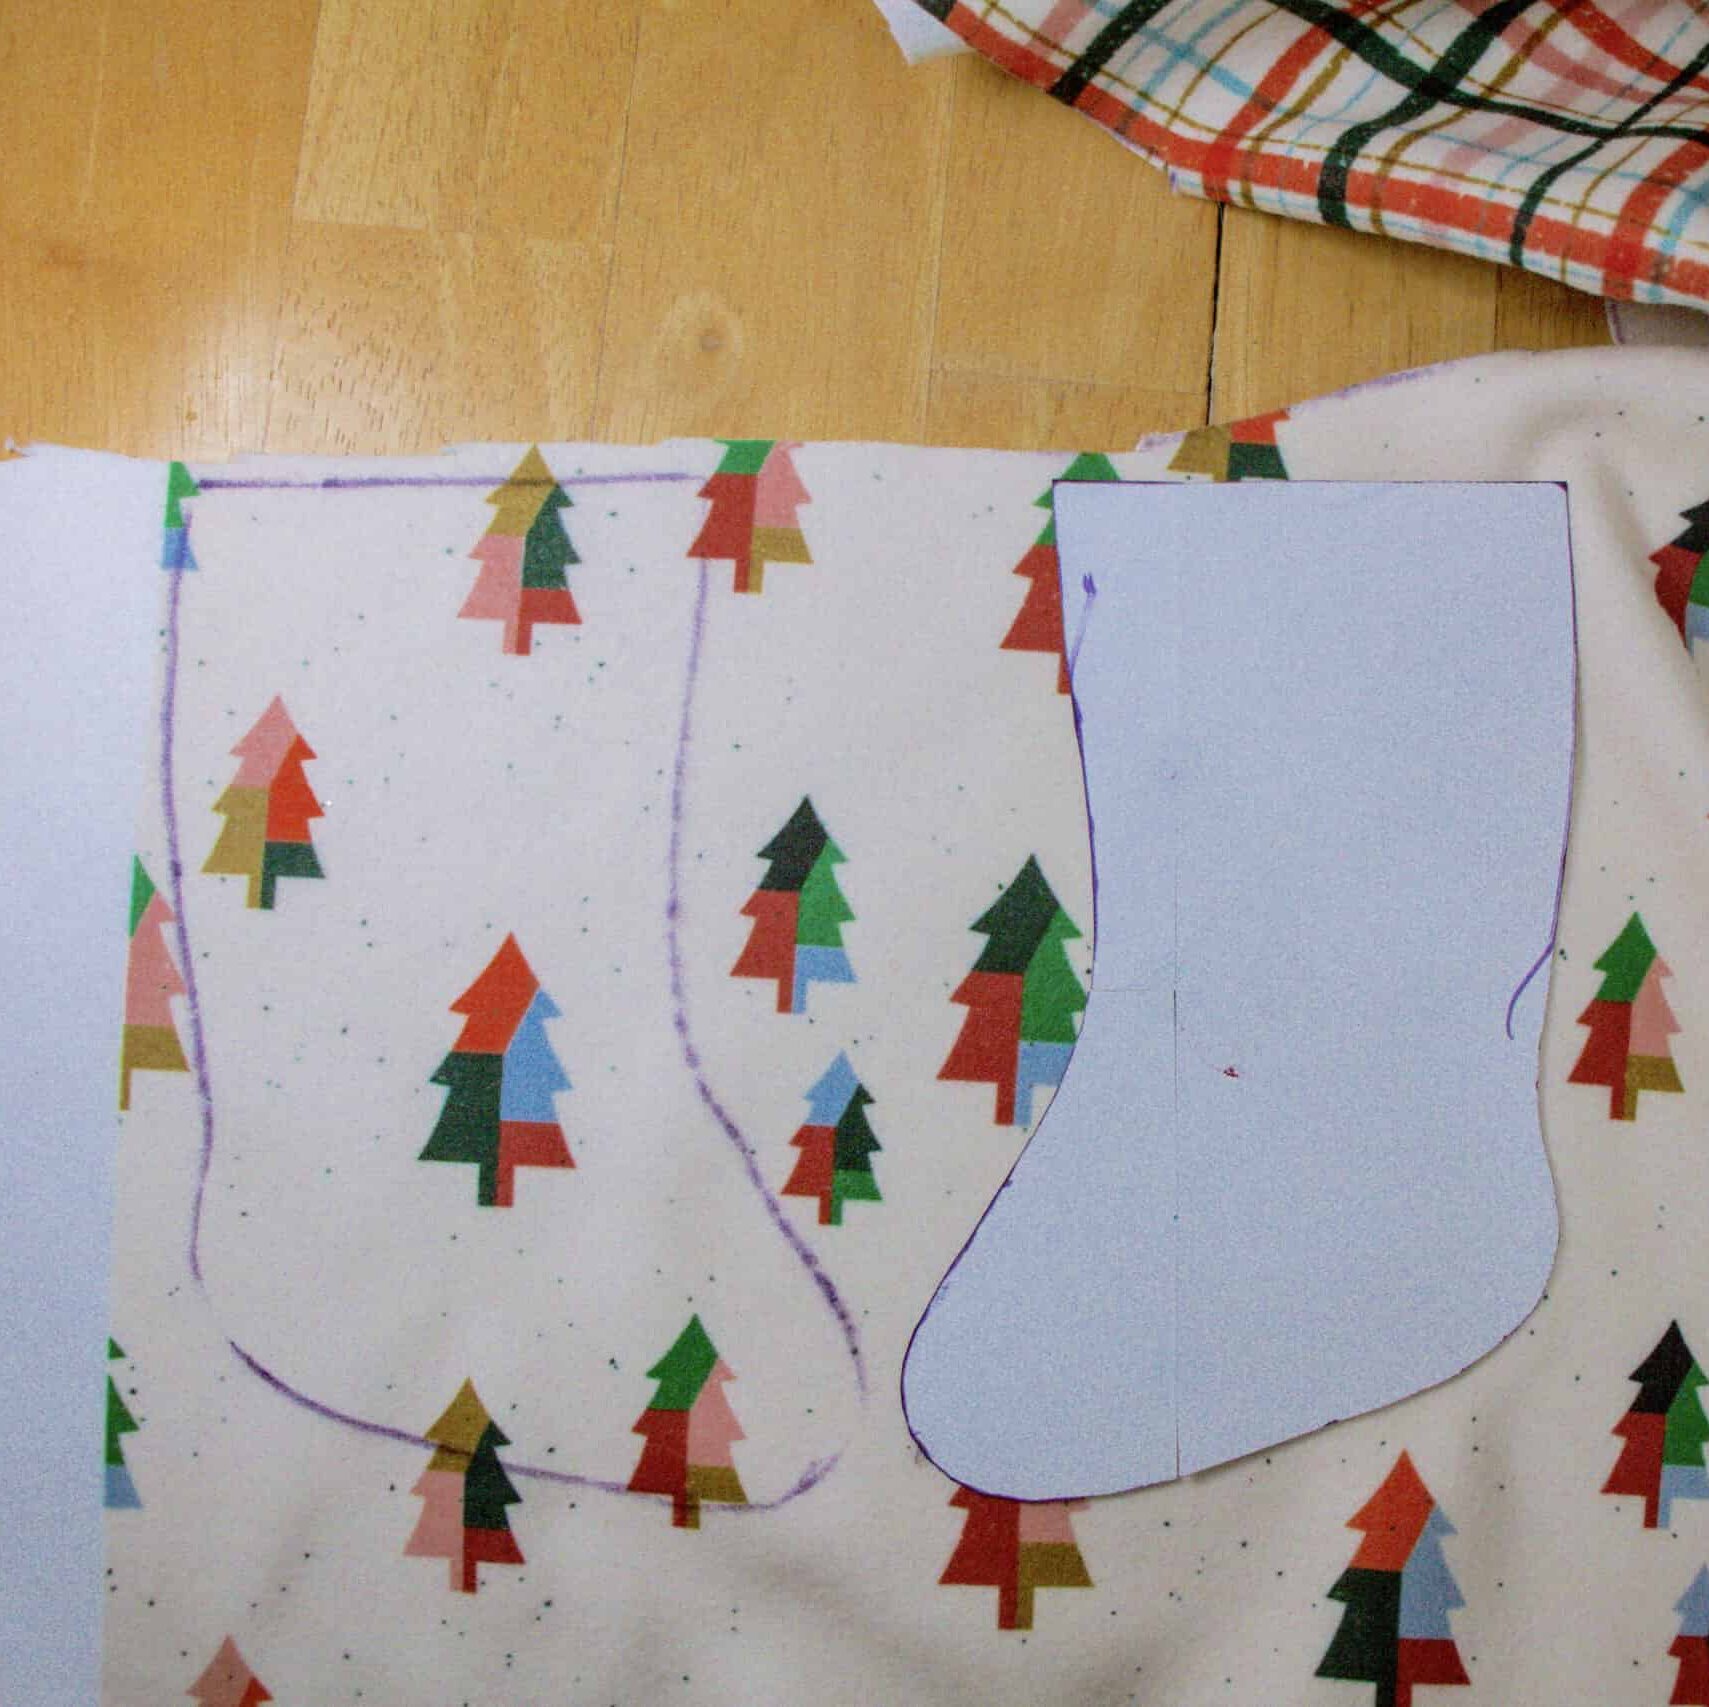 One side of a stocking has been tried onto fabric featuring a design on the fabric with dark green, Kelly green, light blue and brown color-blocked trees on a cream background. The other side of the stocking has not been cut out yet, but the paper pattern piece is laying on top of the fabric.